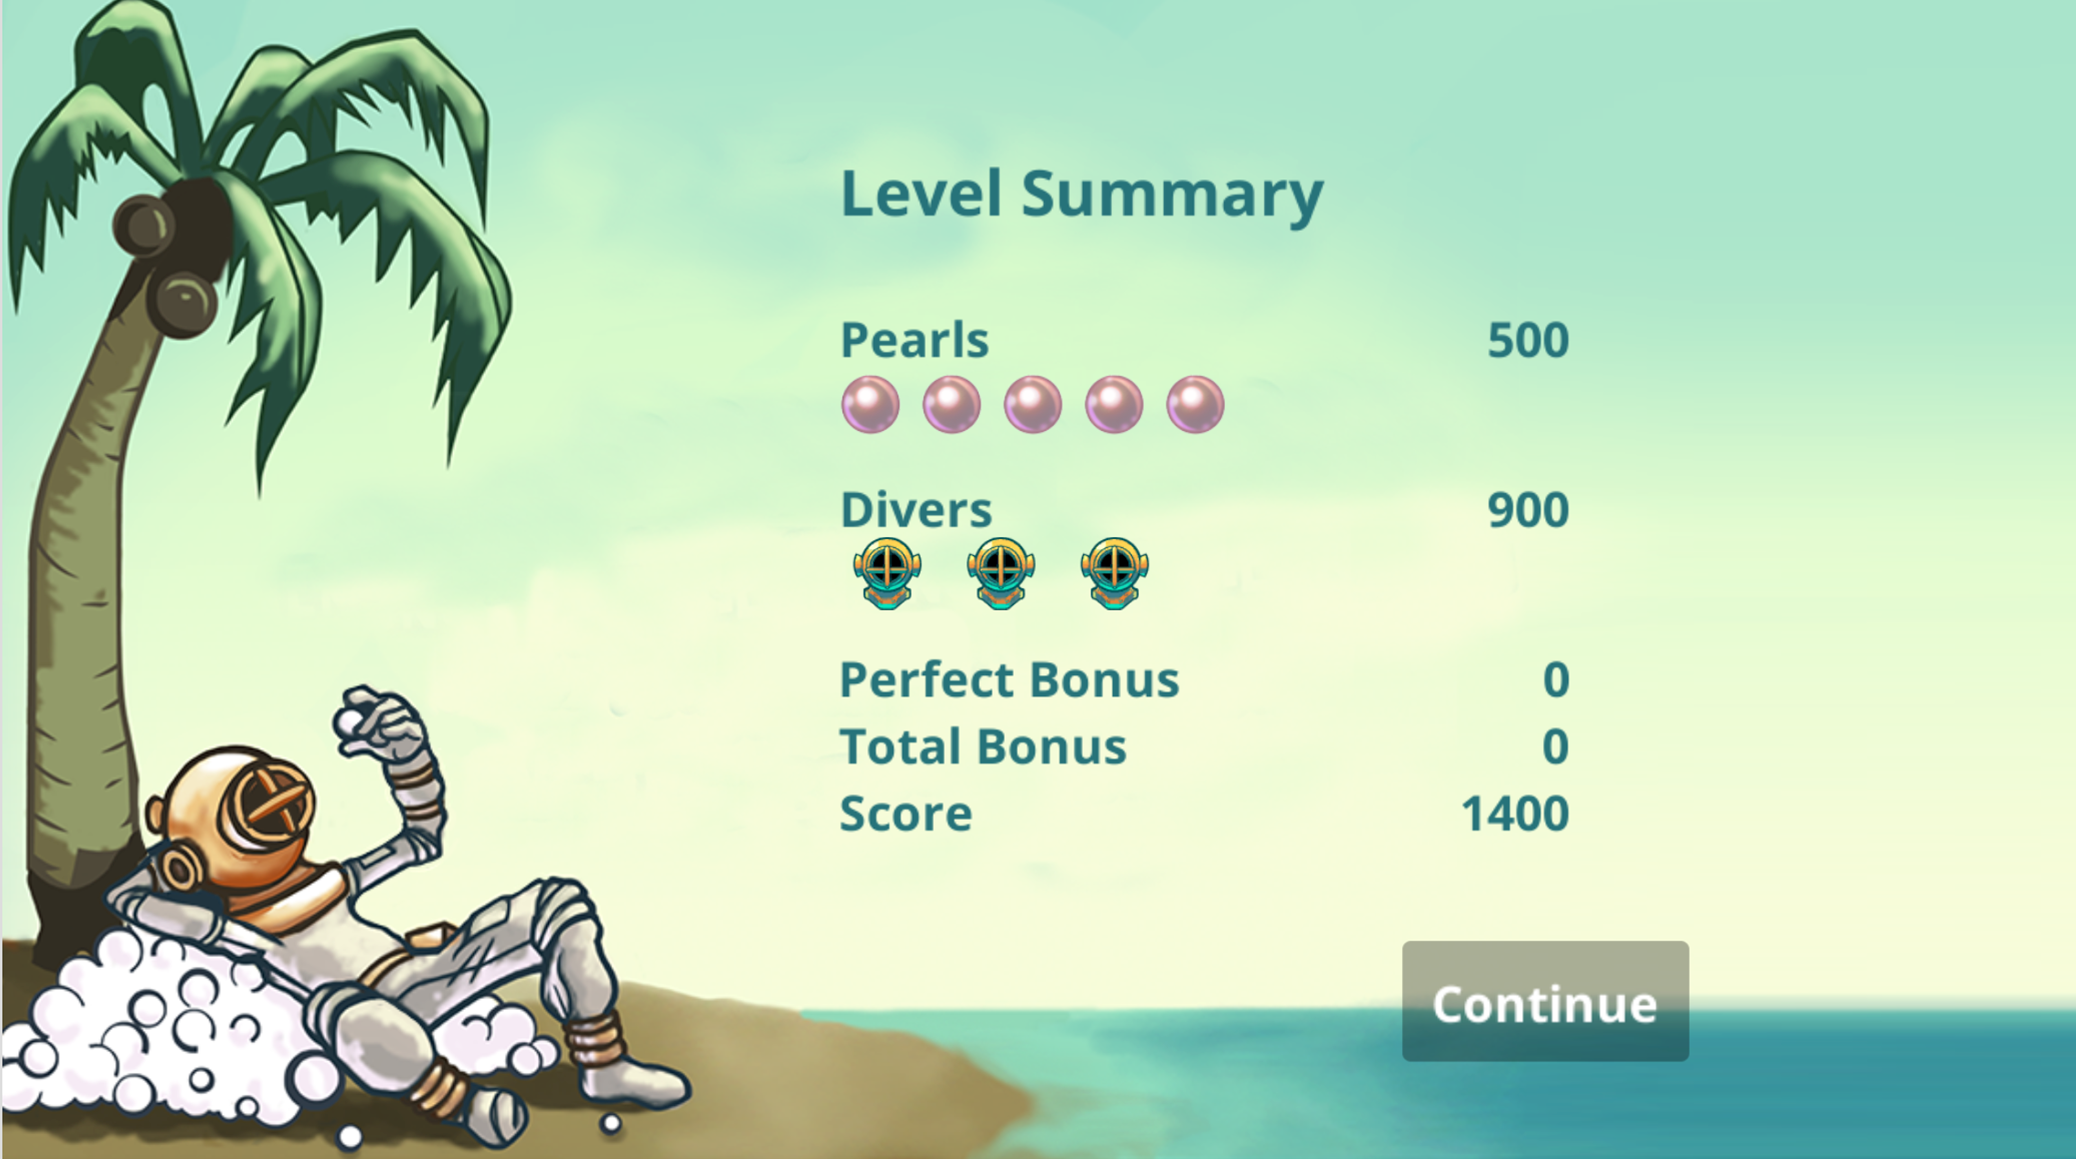 Pearl Diver screenshot of a level summary